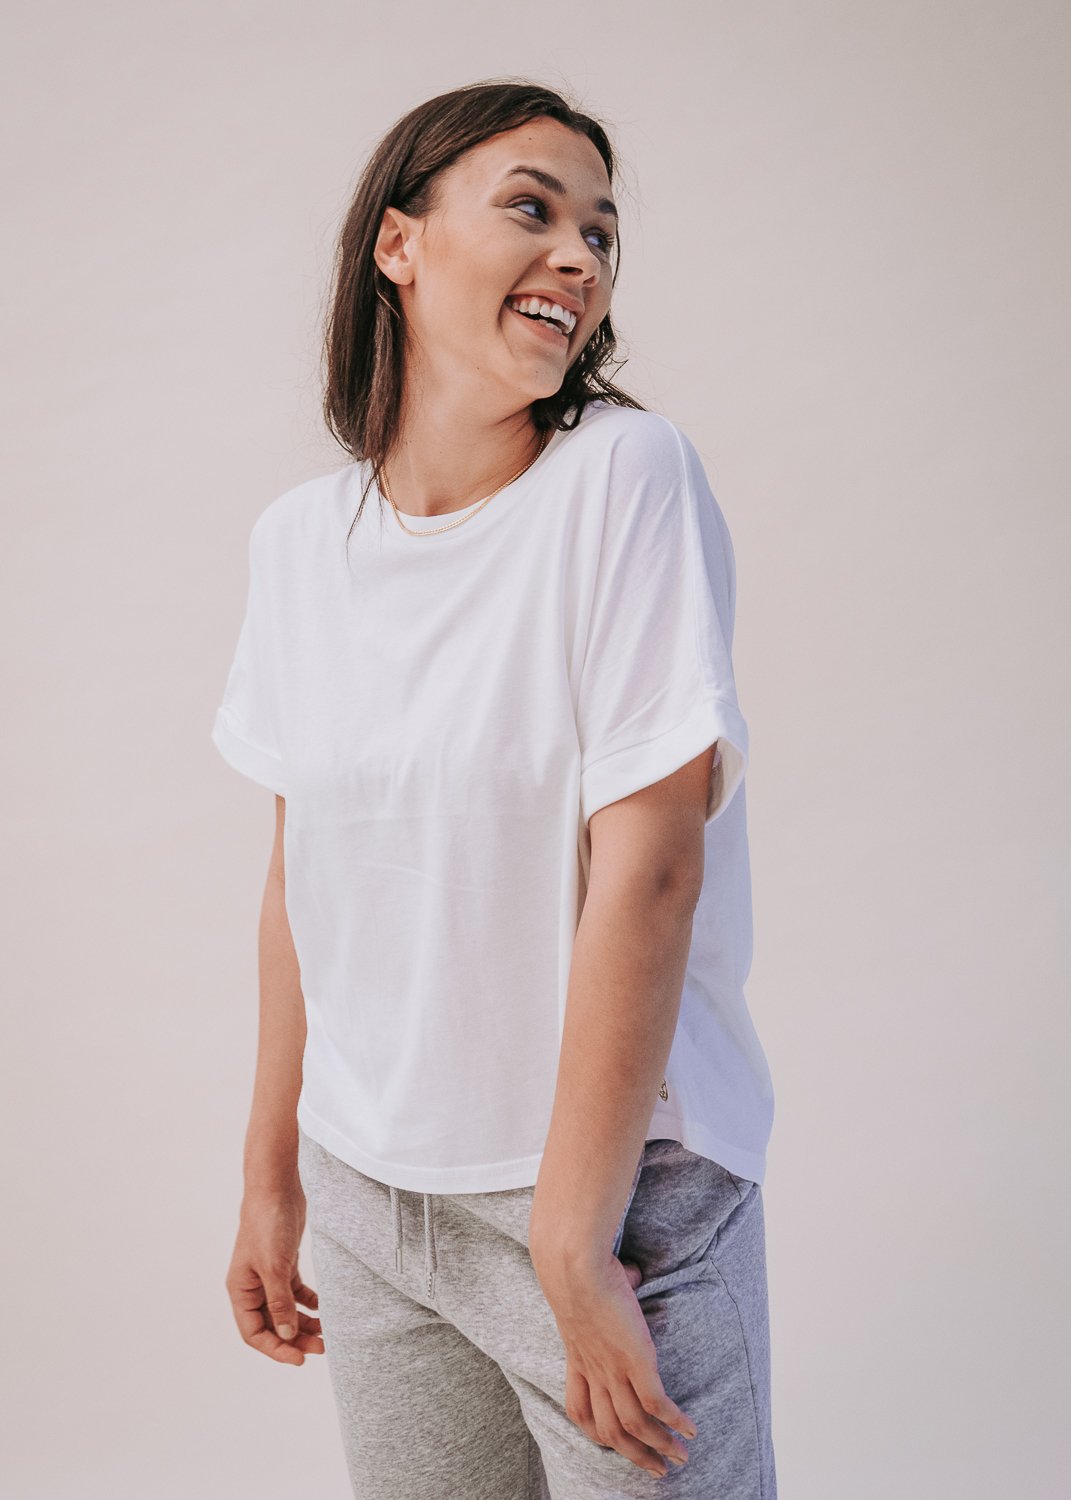 Best Sustainable Loungewear Brands - eco club